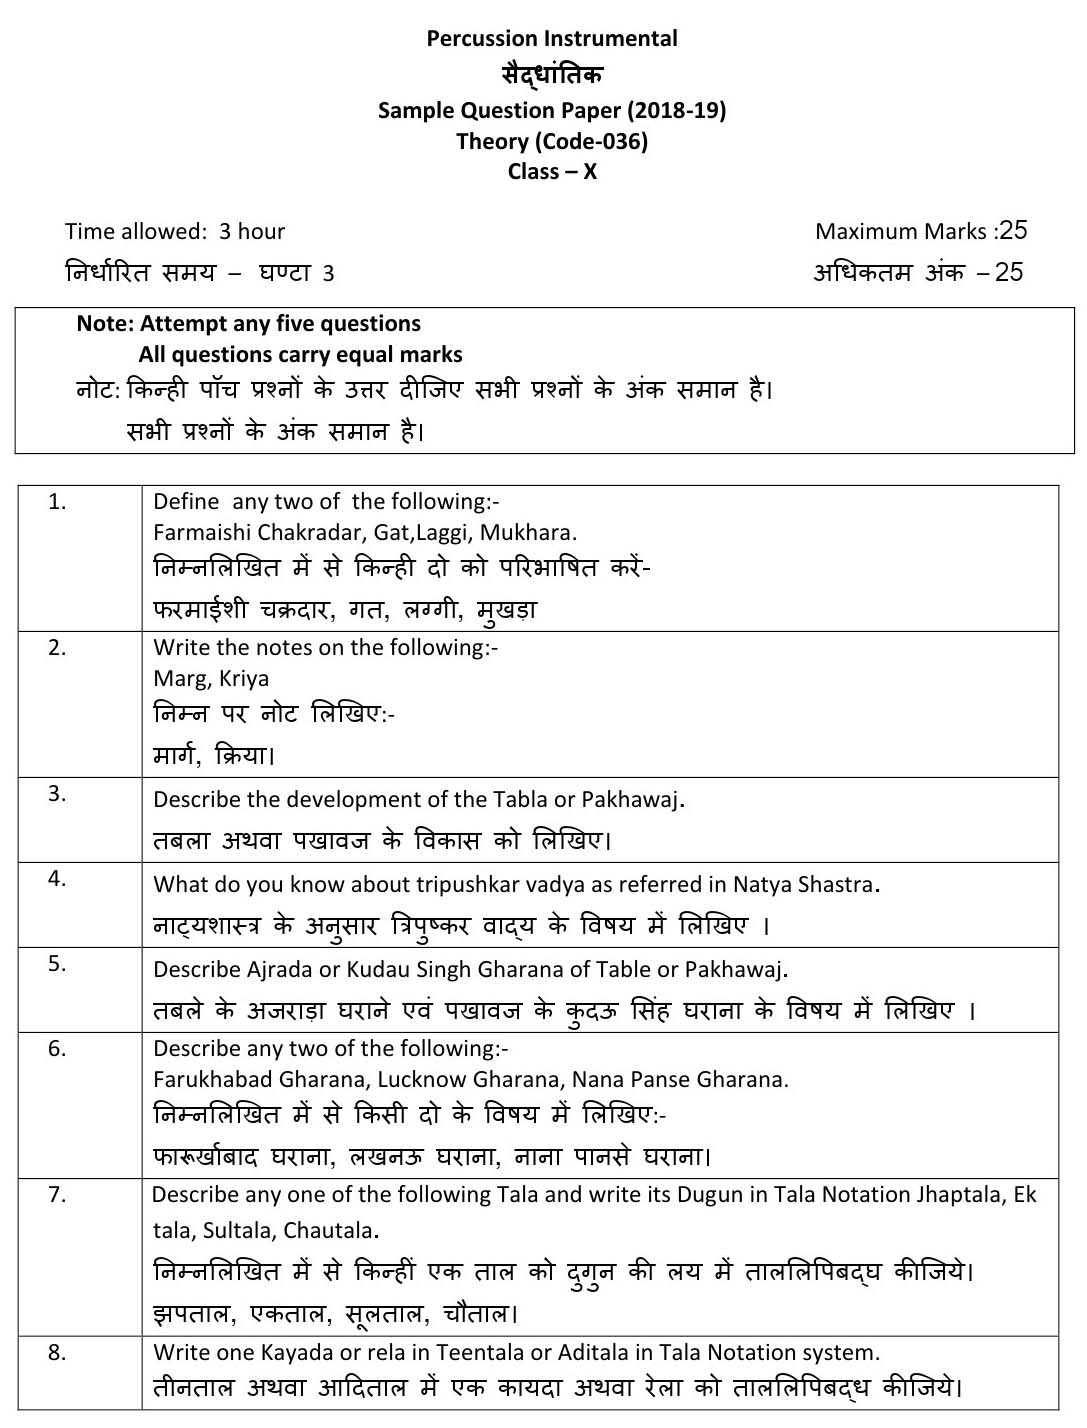 Hindustani Music Percussion Instrument CBSE Class X Sample Question Paper 2018-19 - Image 1